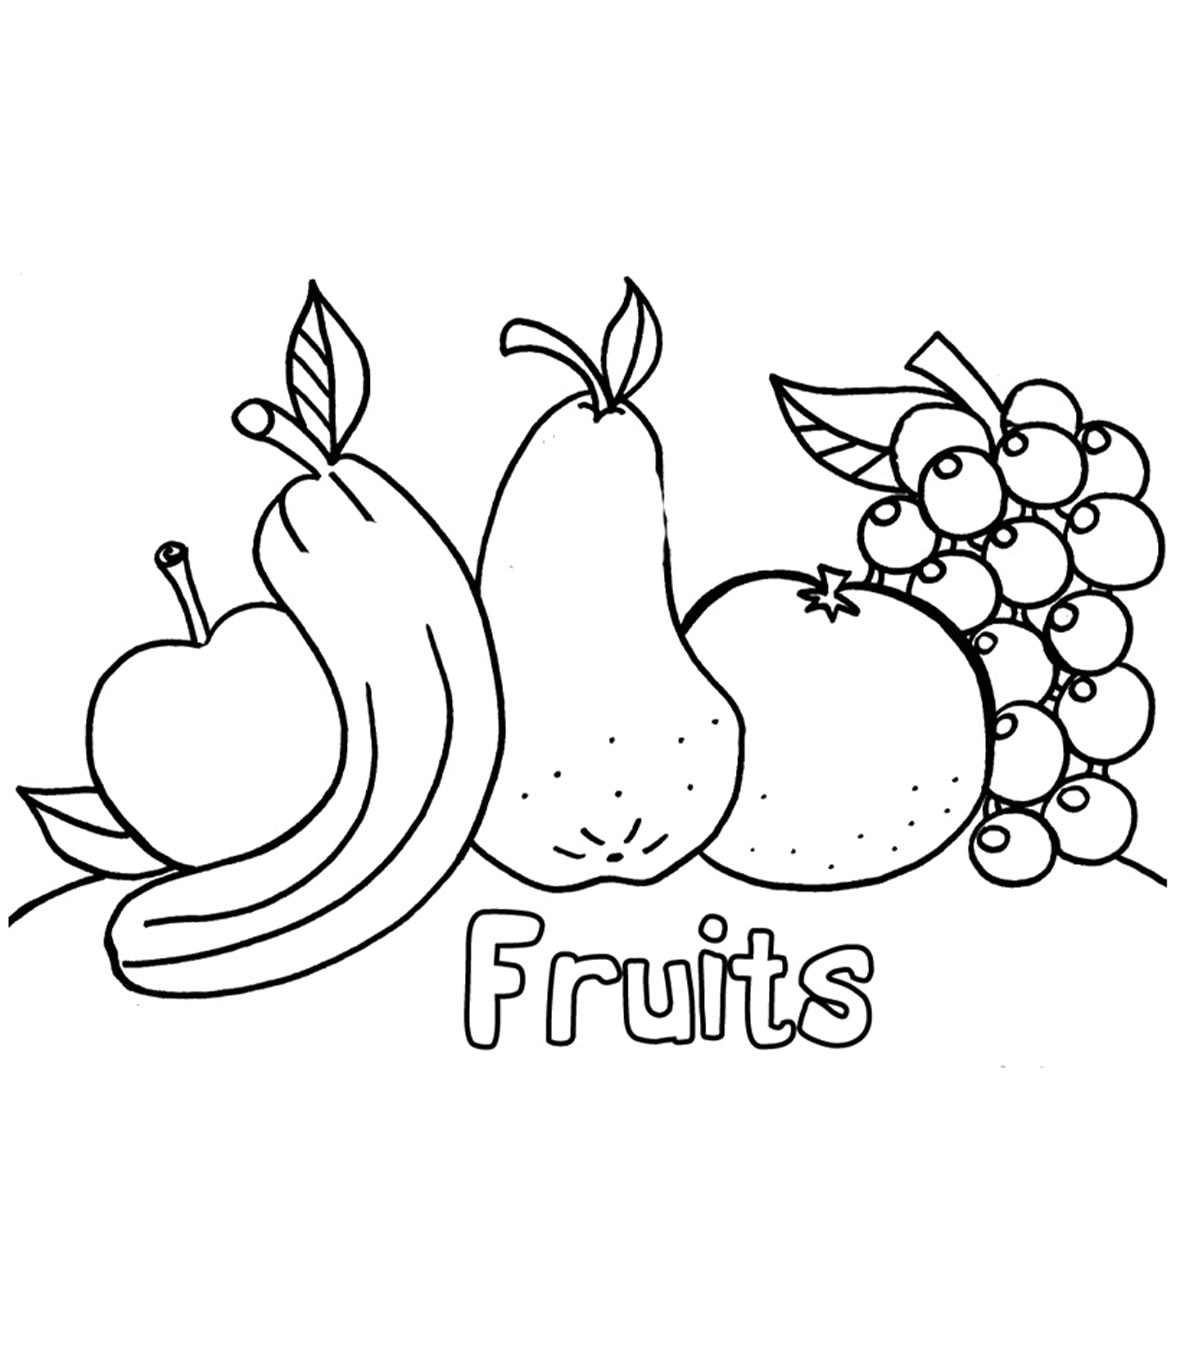 Download Fruits and Vegetables Coloring Pages - MomJunction